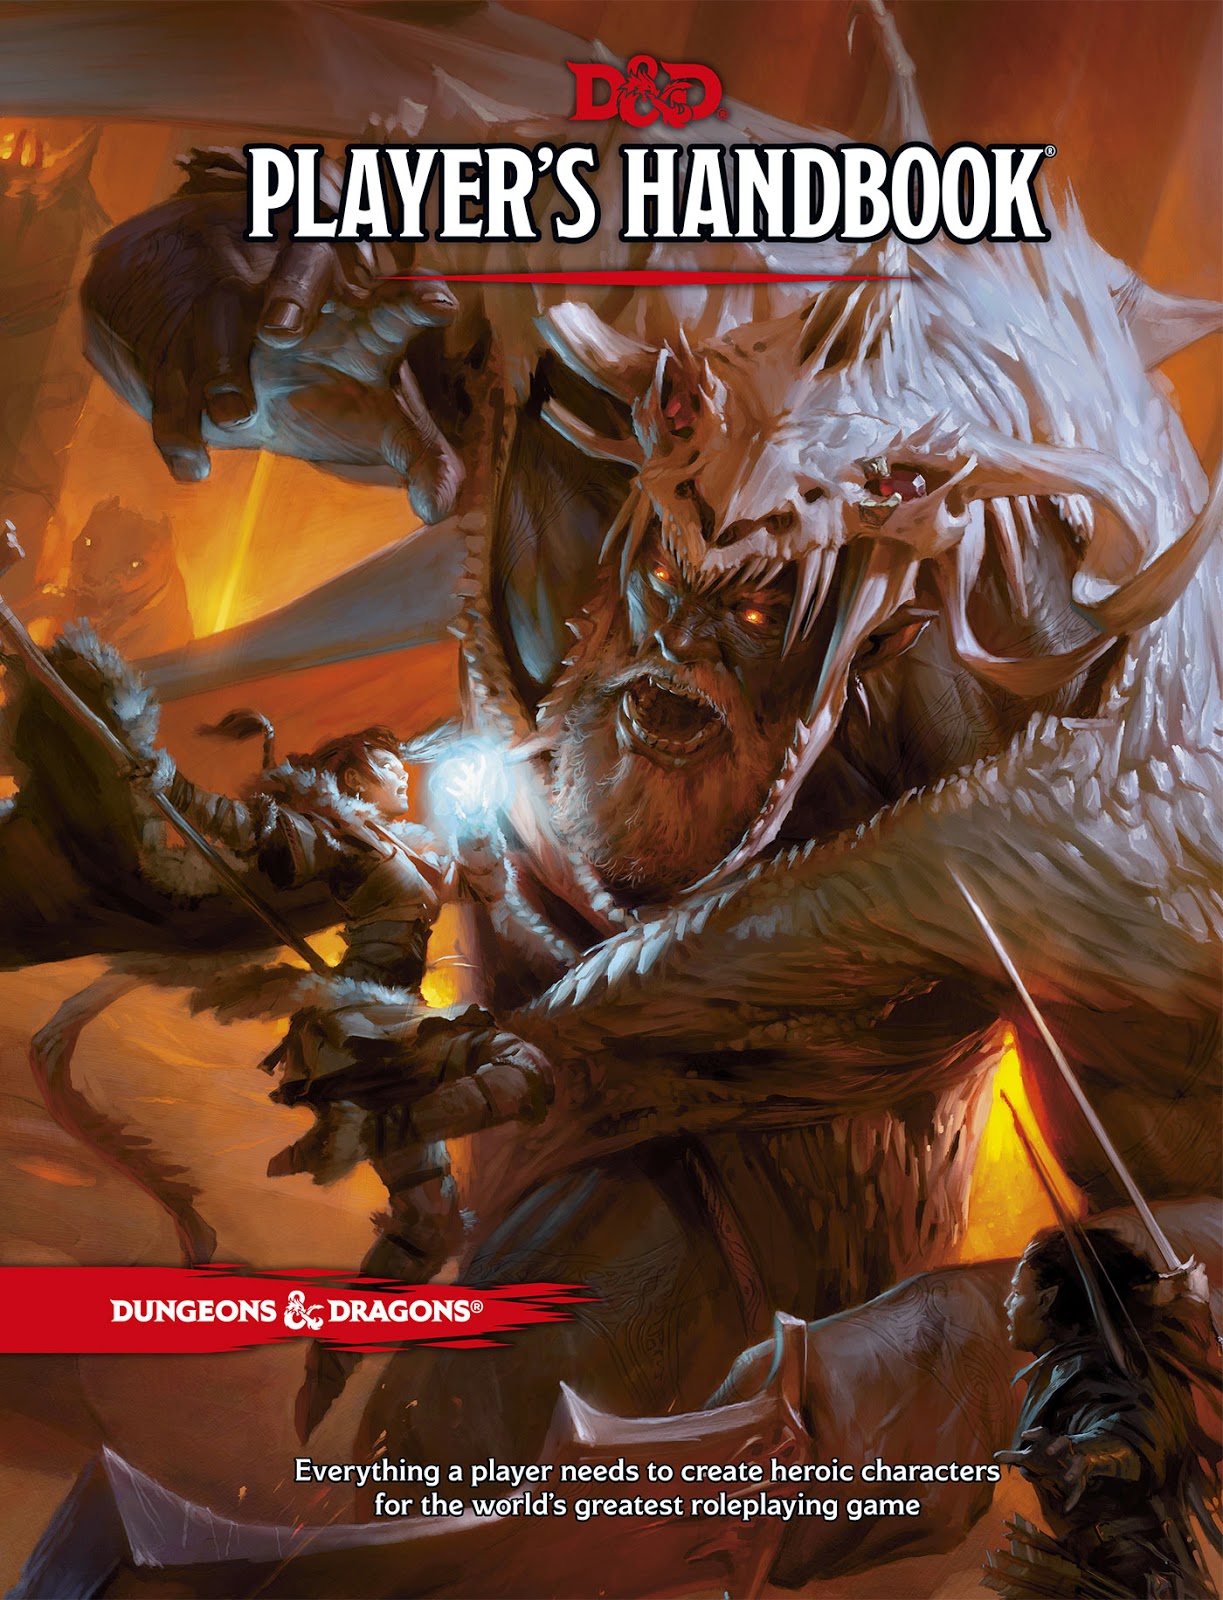 http://www.rebel.pl/category.php/1,2054/Dungeons-Dragons-5.0.html